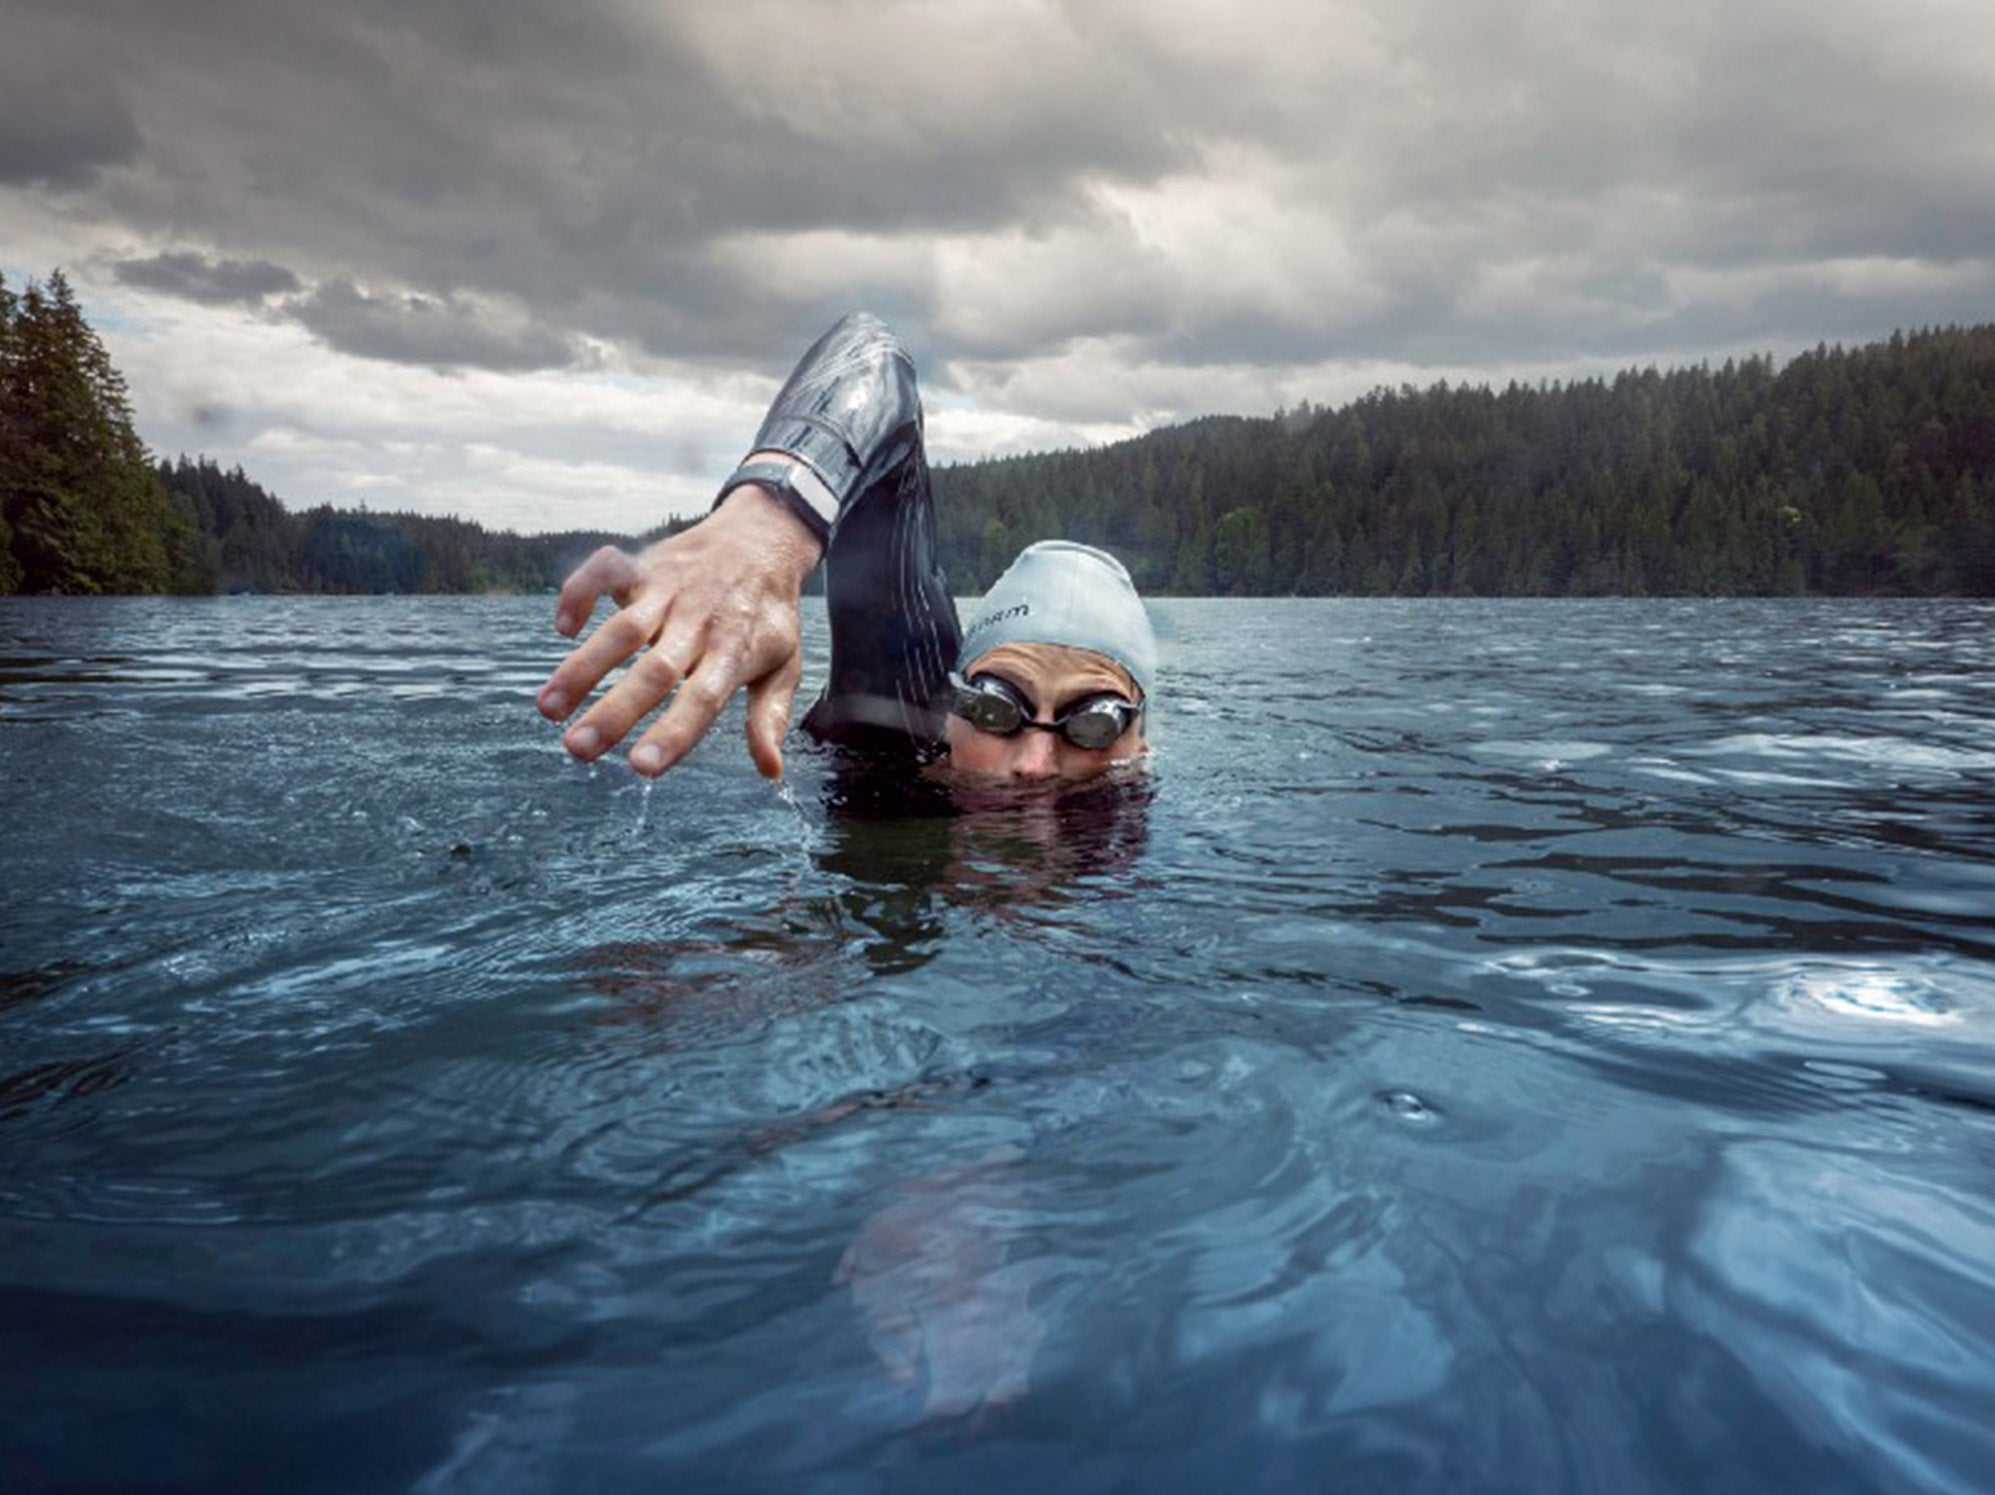 Keith Eriks open water swimming